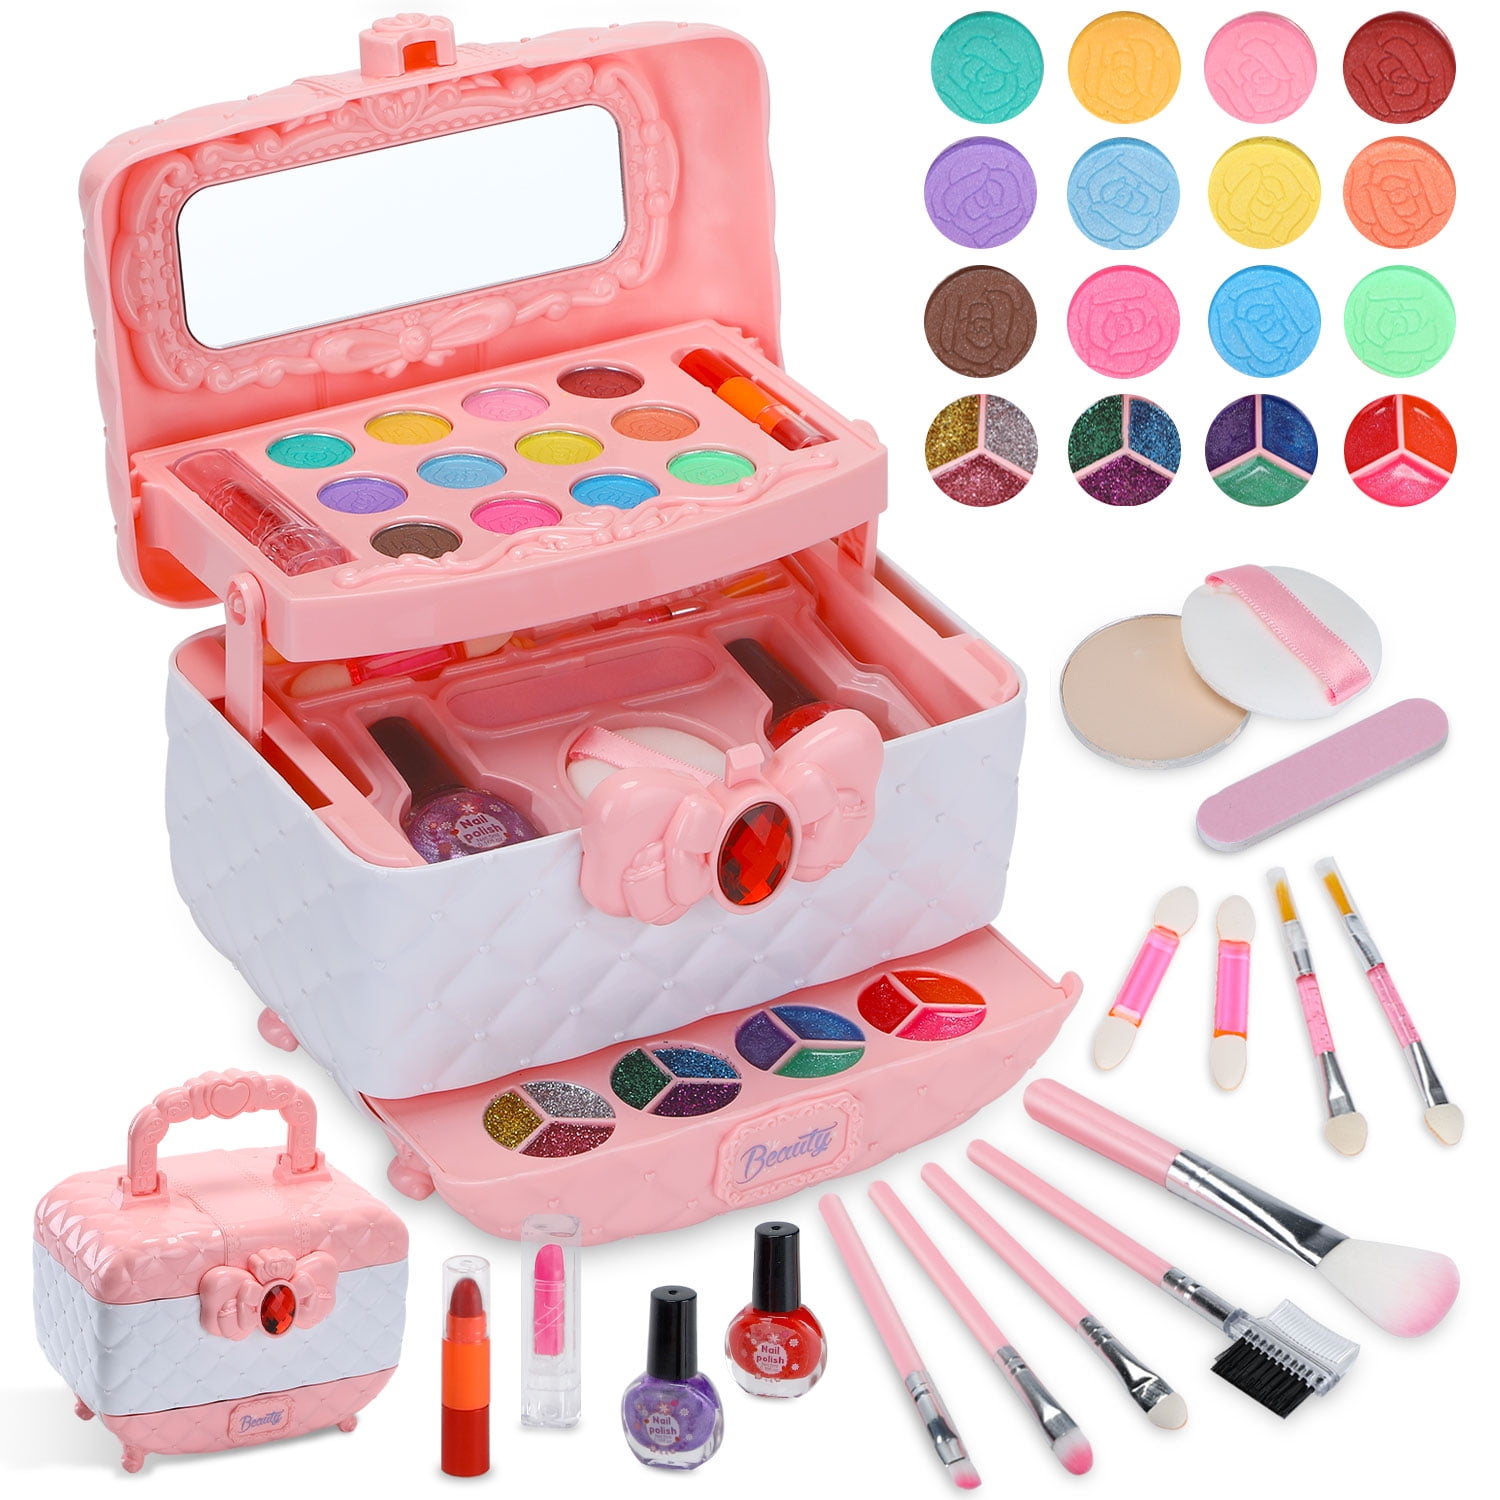 Toysical Nail Art Kit for Girls - Girls Nail Polish Sets for Kids or Tweens  - Non Toxic Nail Gift Set - Top Birthday Gift for Ages 6 7 8 9 10 11 12 Year  Old Children or Pre-Teen Girls